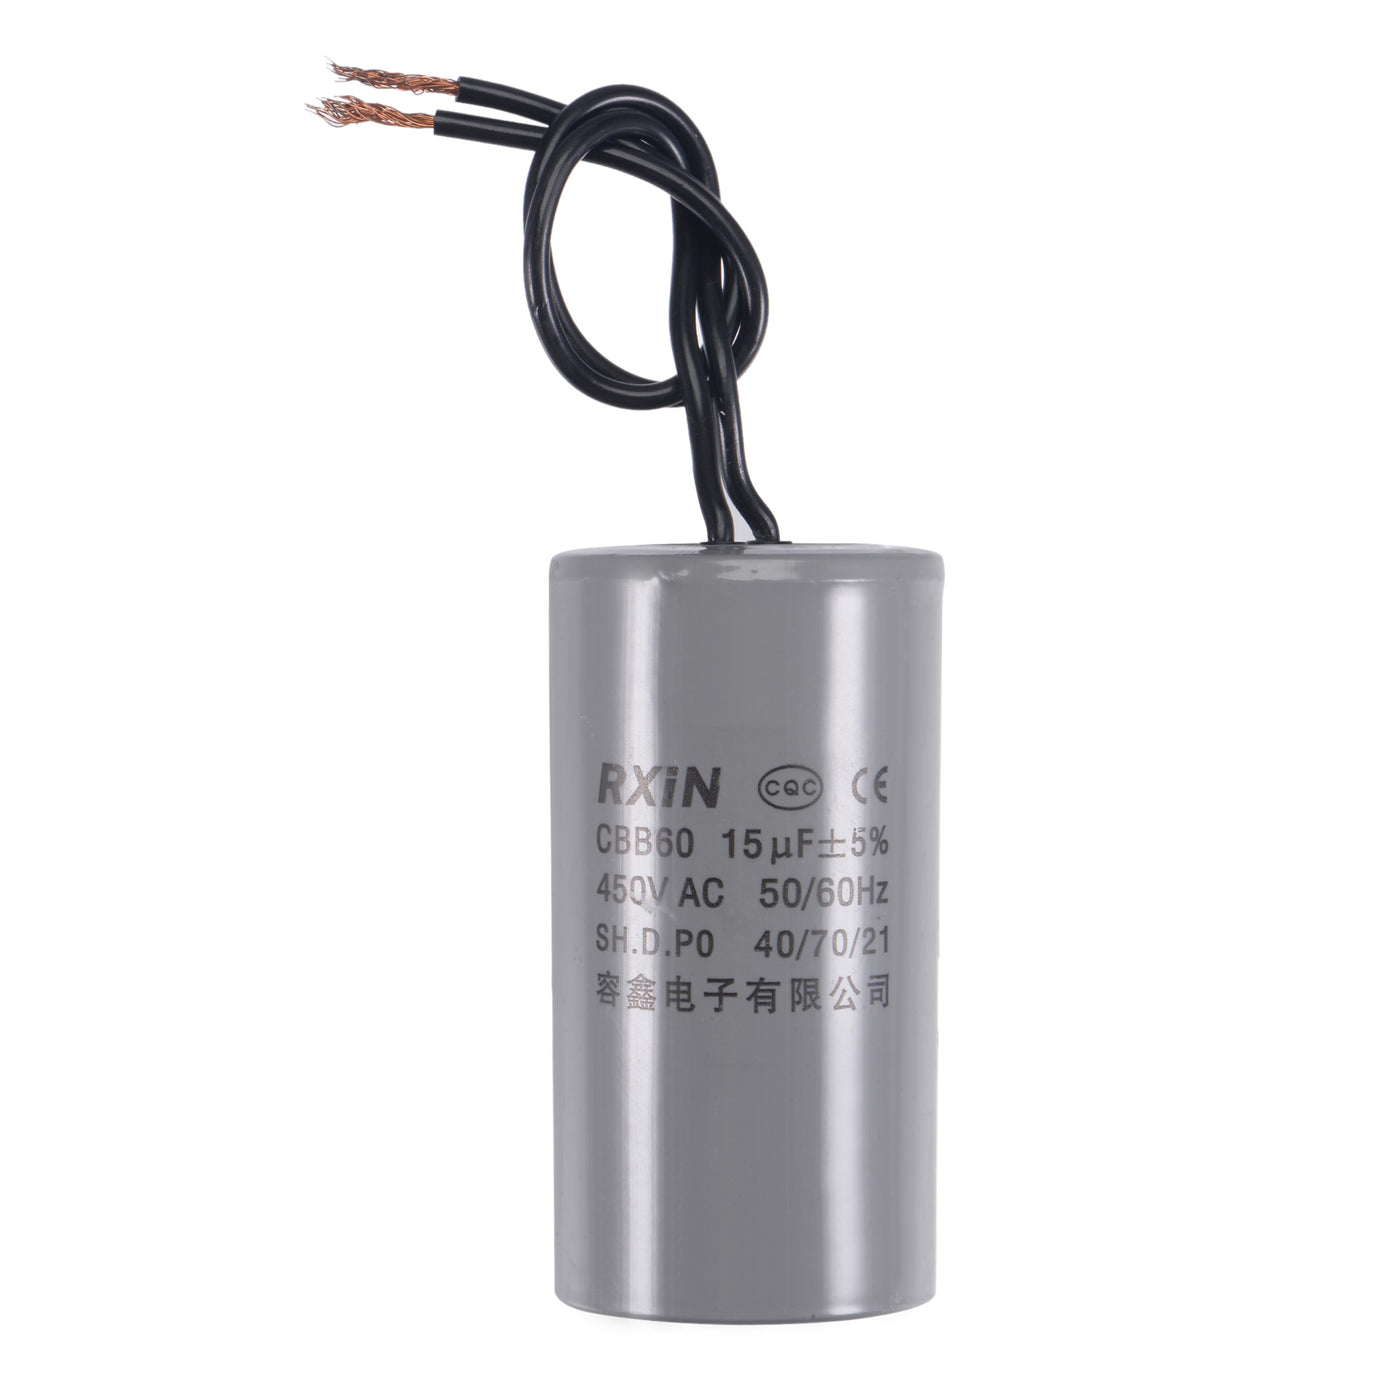 uxcell Uxcell CBB60 Run Capacitor 15uF 450V AC 2 Wires 50/60Hz Cylinder 74x38mm for Air Compressor Water Pump Motor